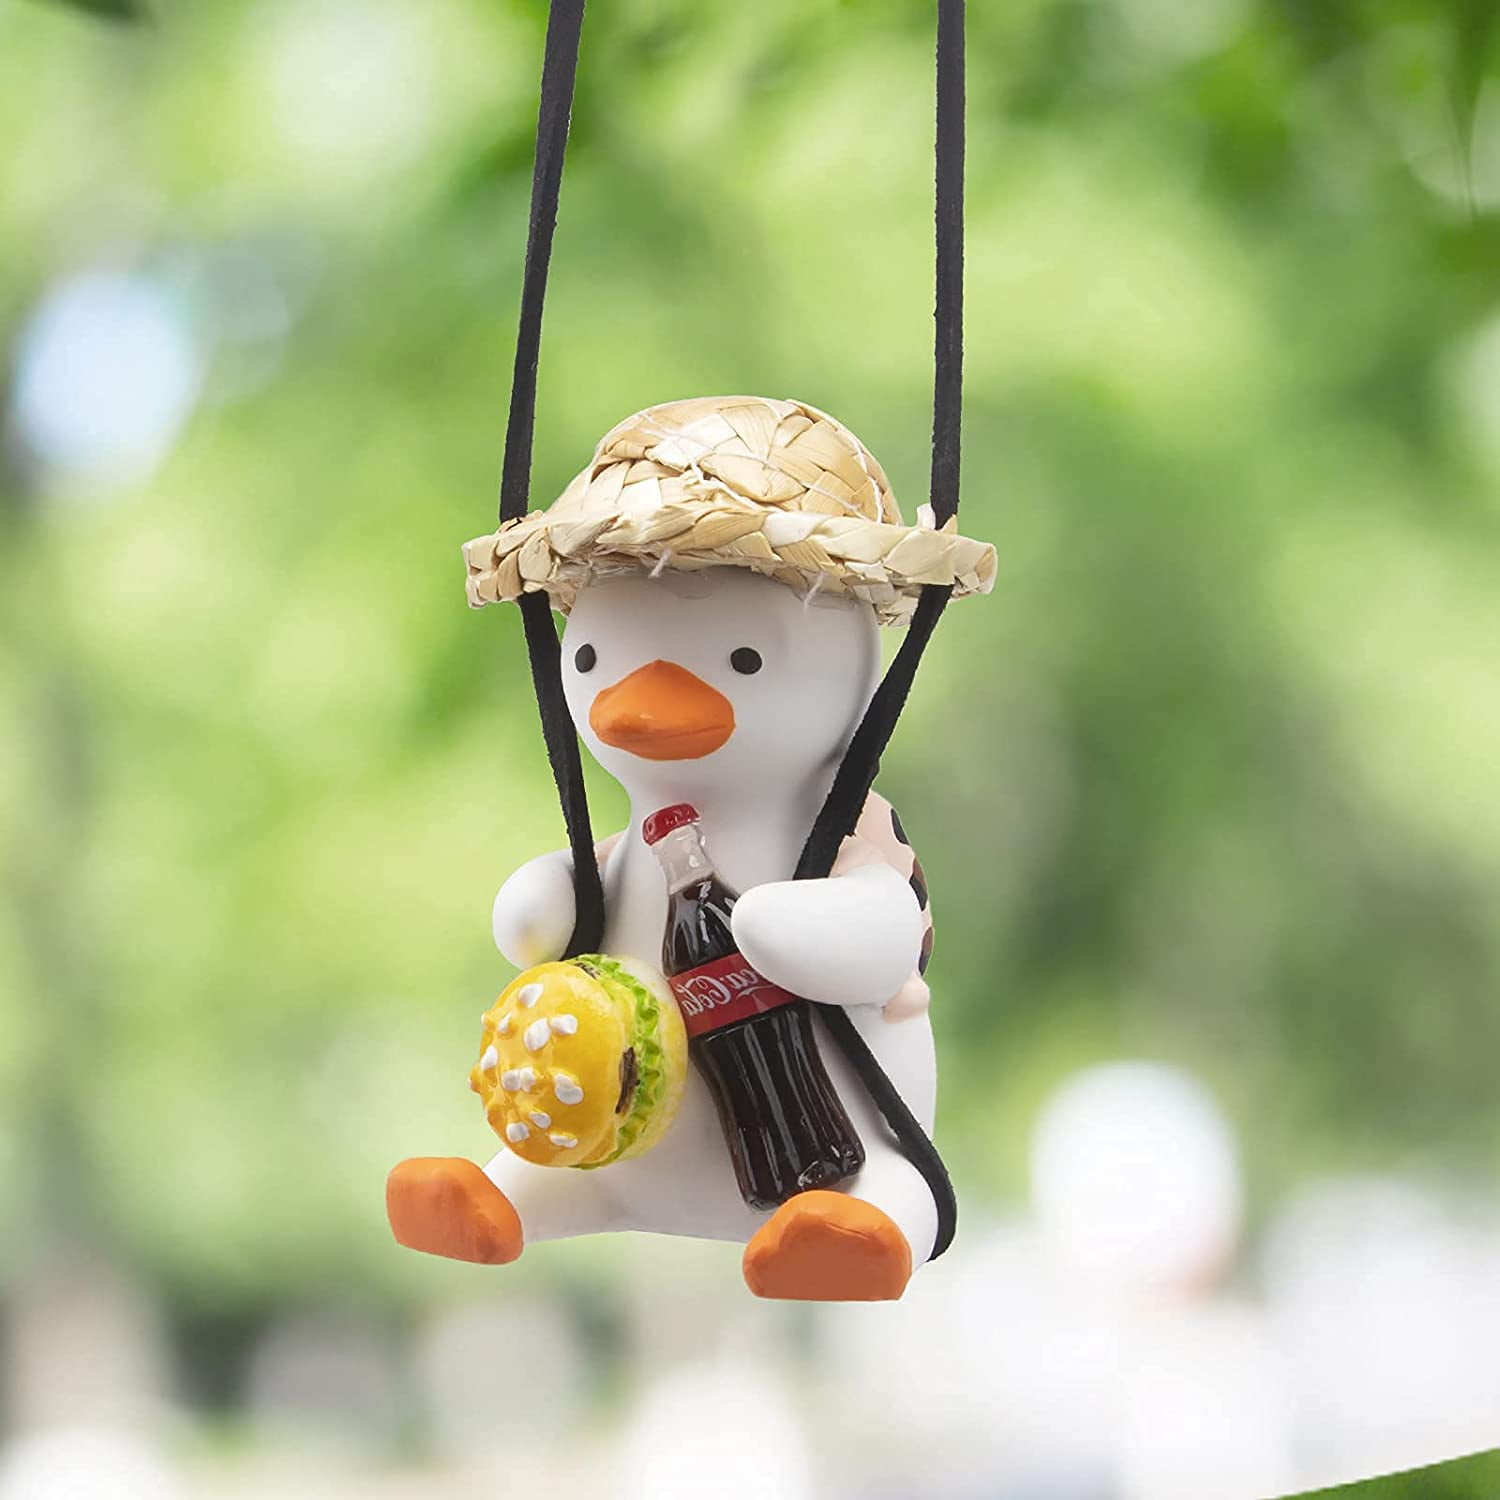 Homes And Offices Swing Duck Car Pendant Car Rear View Mirror Trailer Duck Ornament Hanging In Plaster Animal Car Accessories Decorations For Cars 